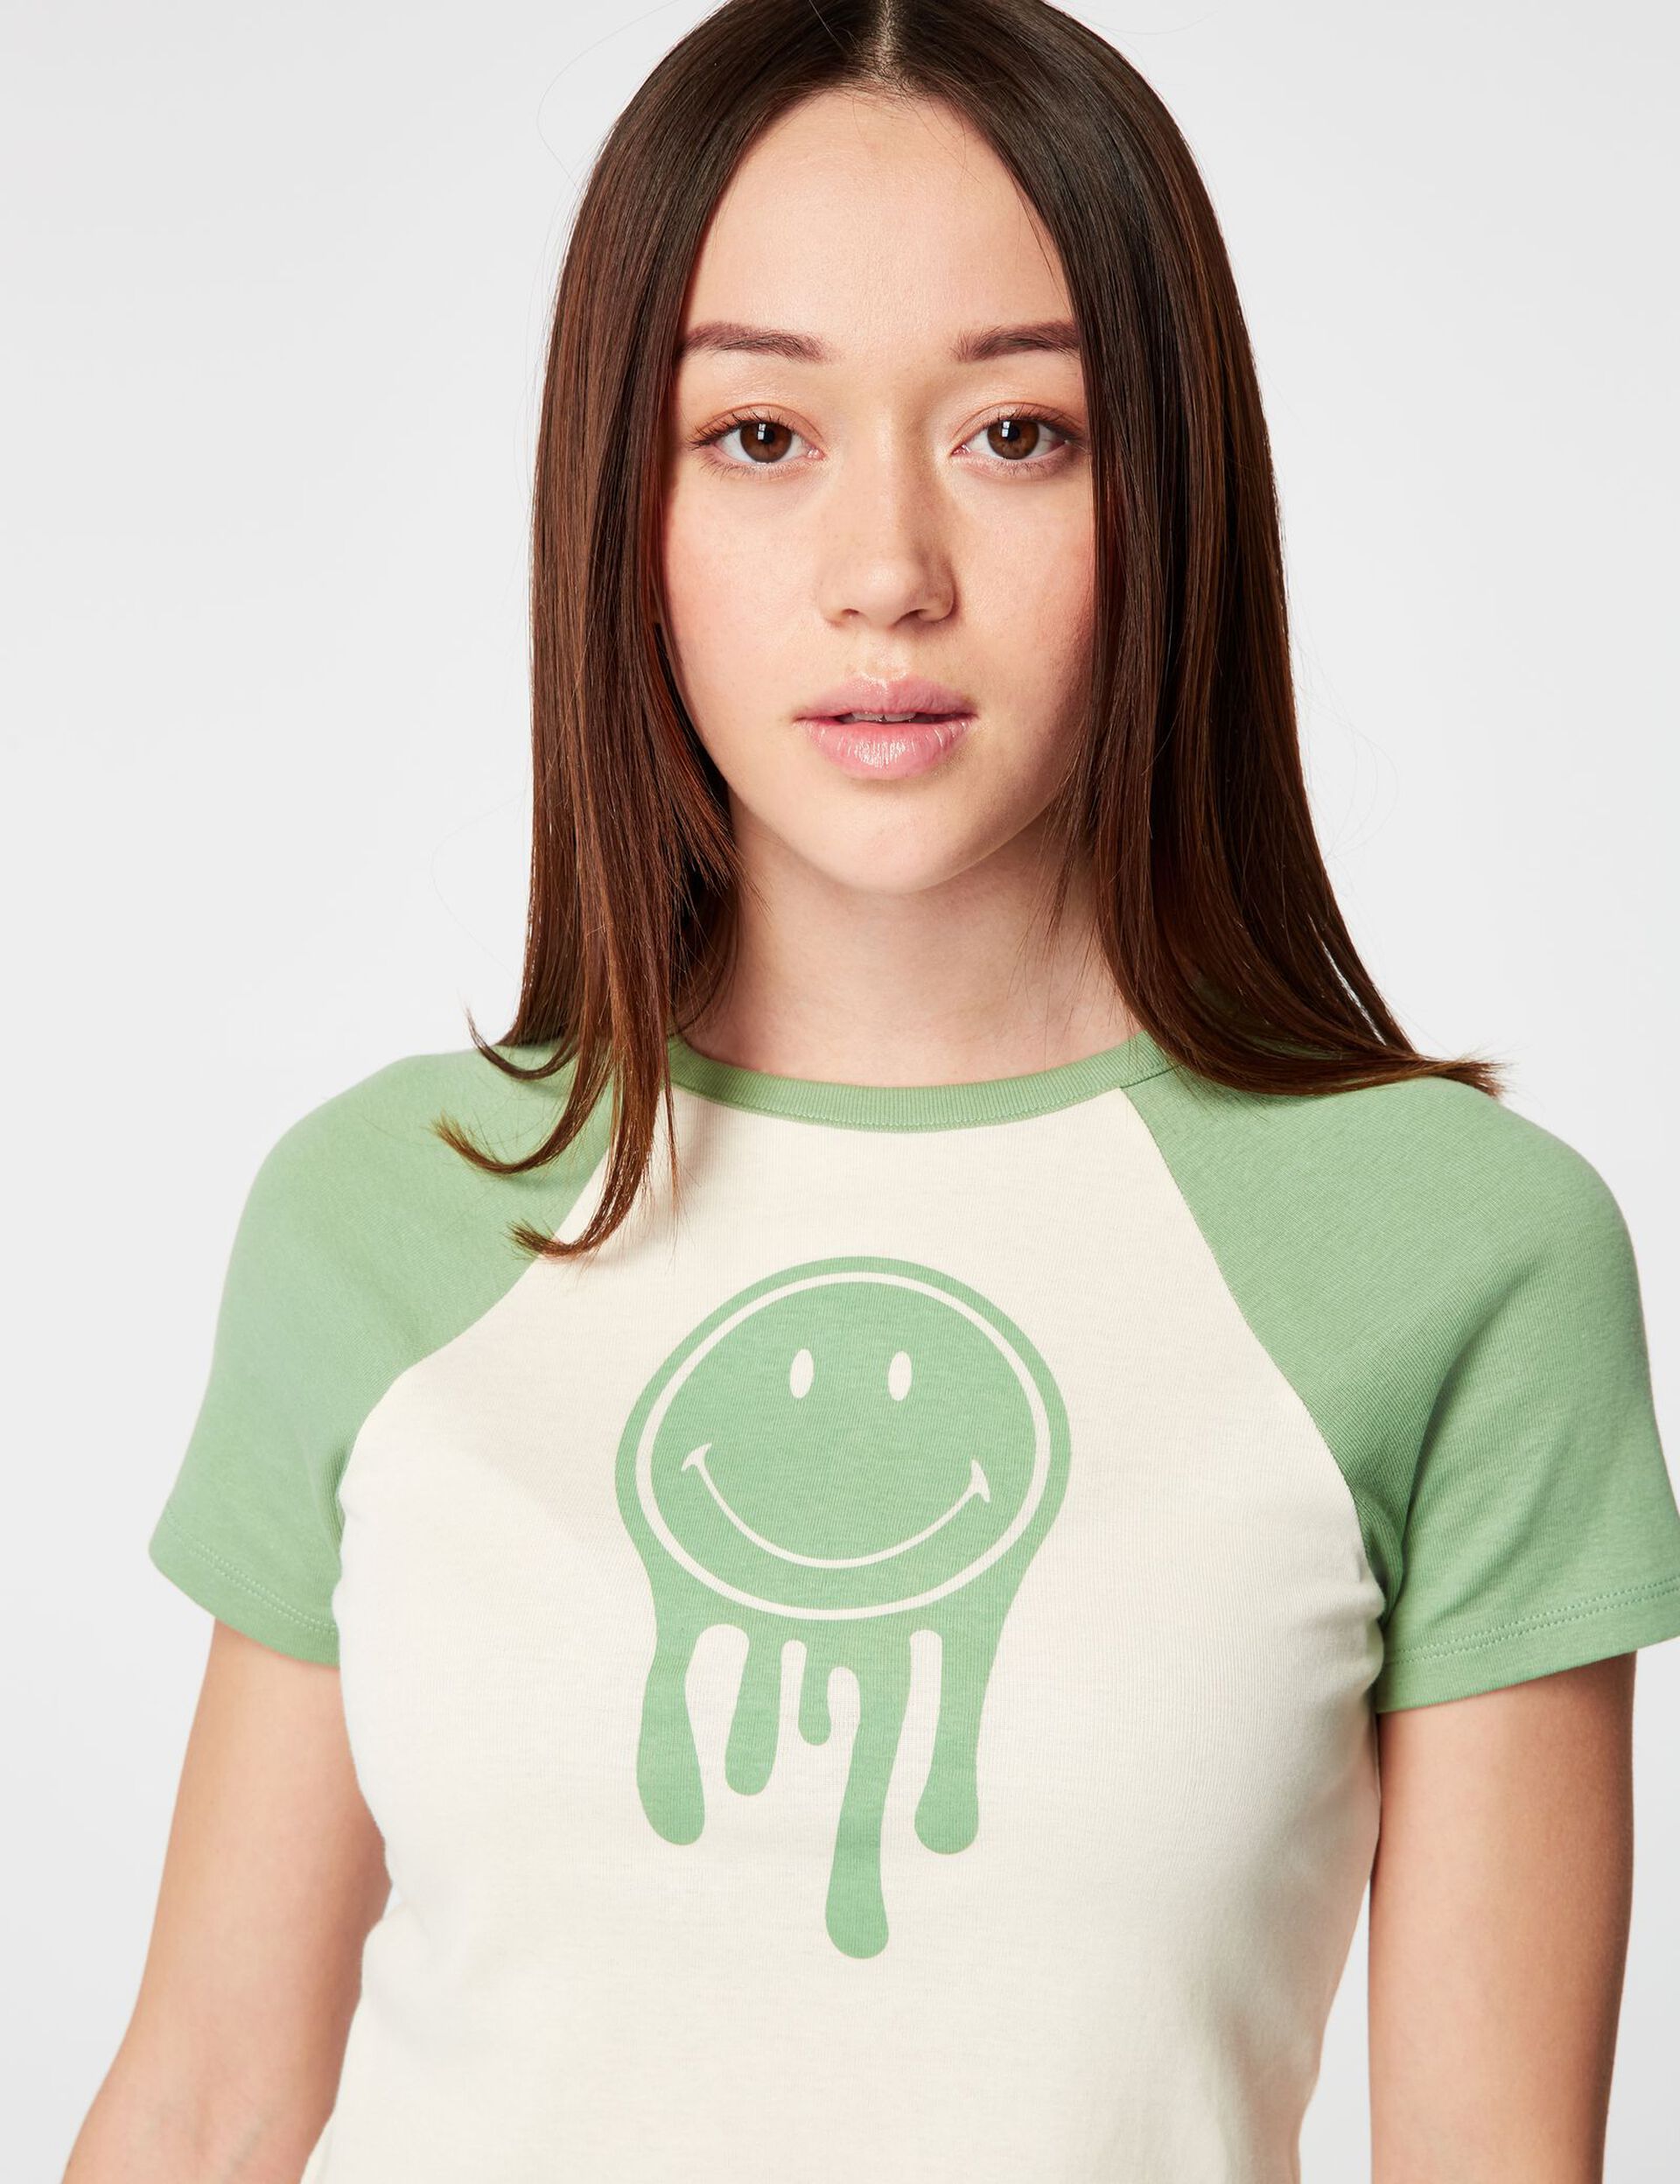 Smiley cropped T-shirt